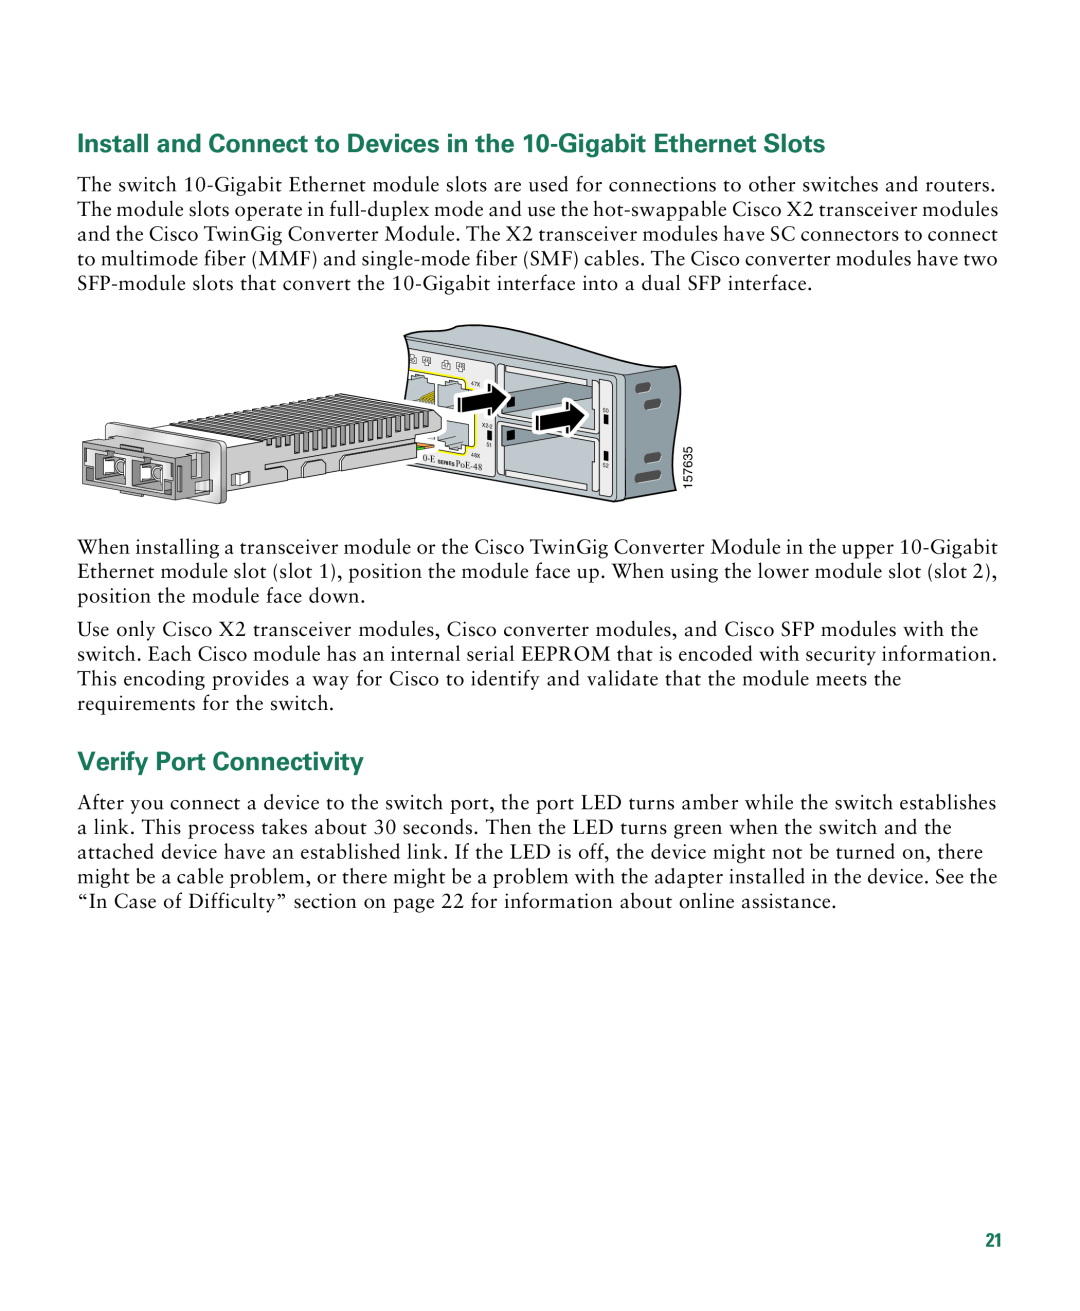 Cisco Systems 3750E-48PD-F manual Install and Connect to Devices in the 10-Gigabit Ethernet Slots, Verify Port Connectivity 